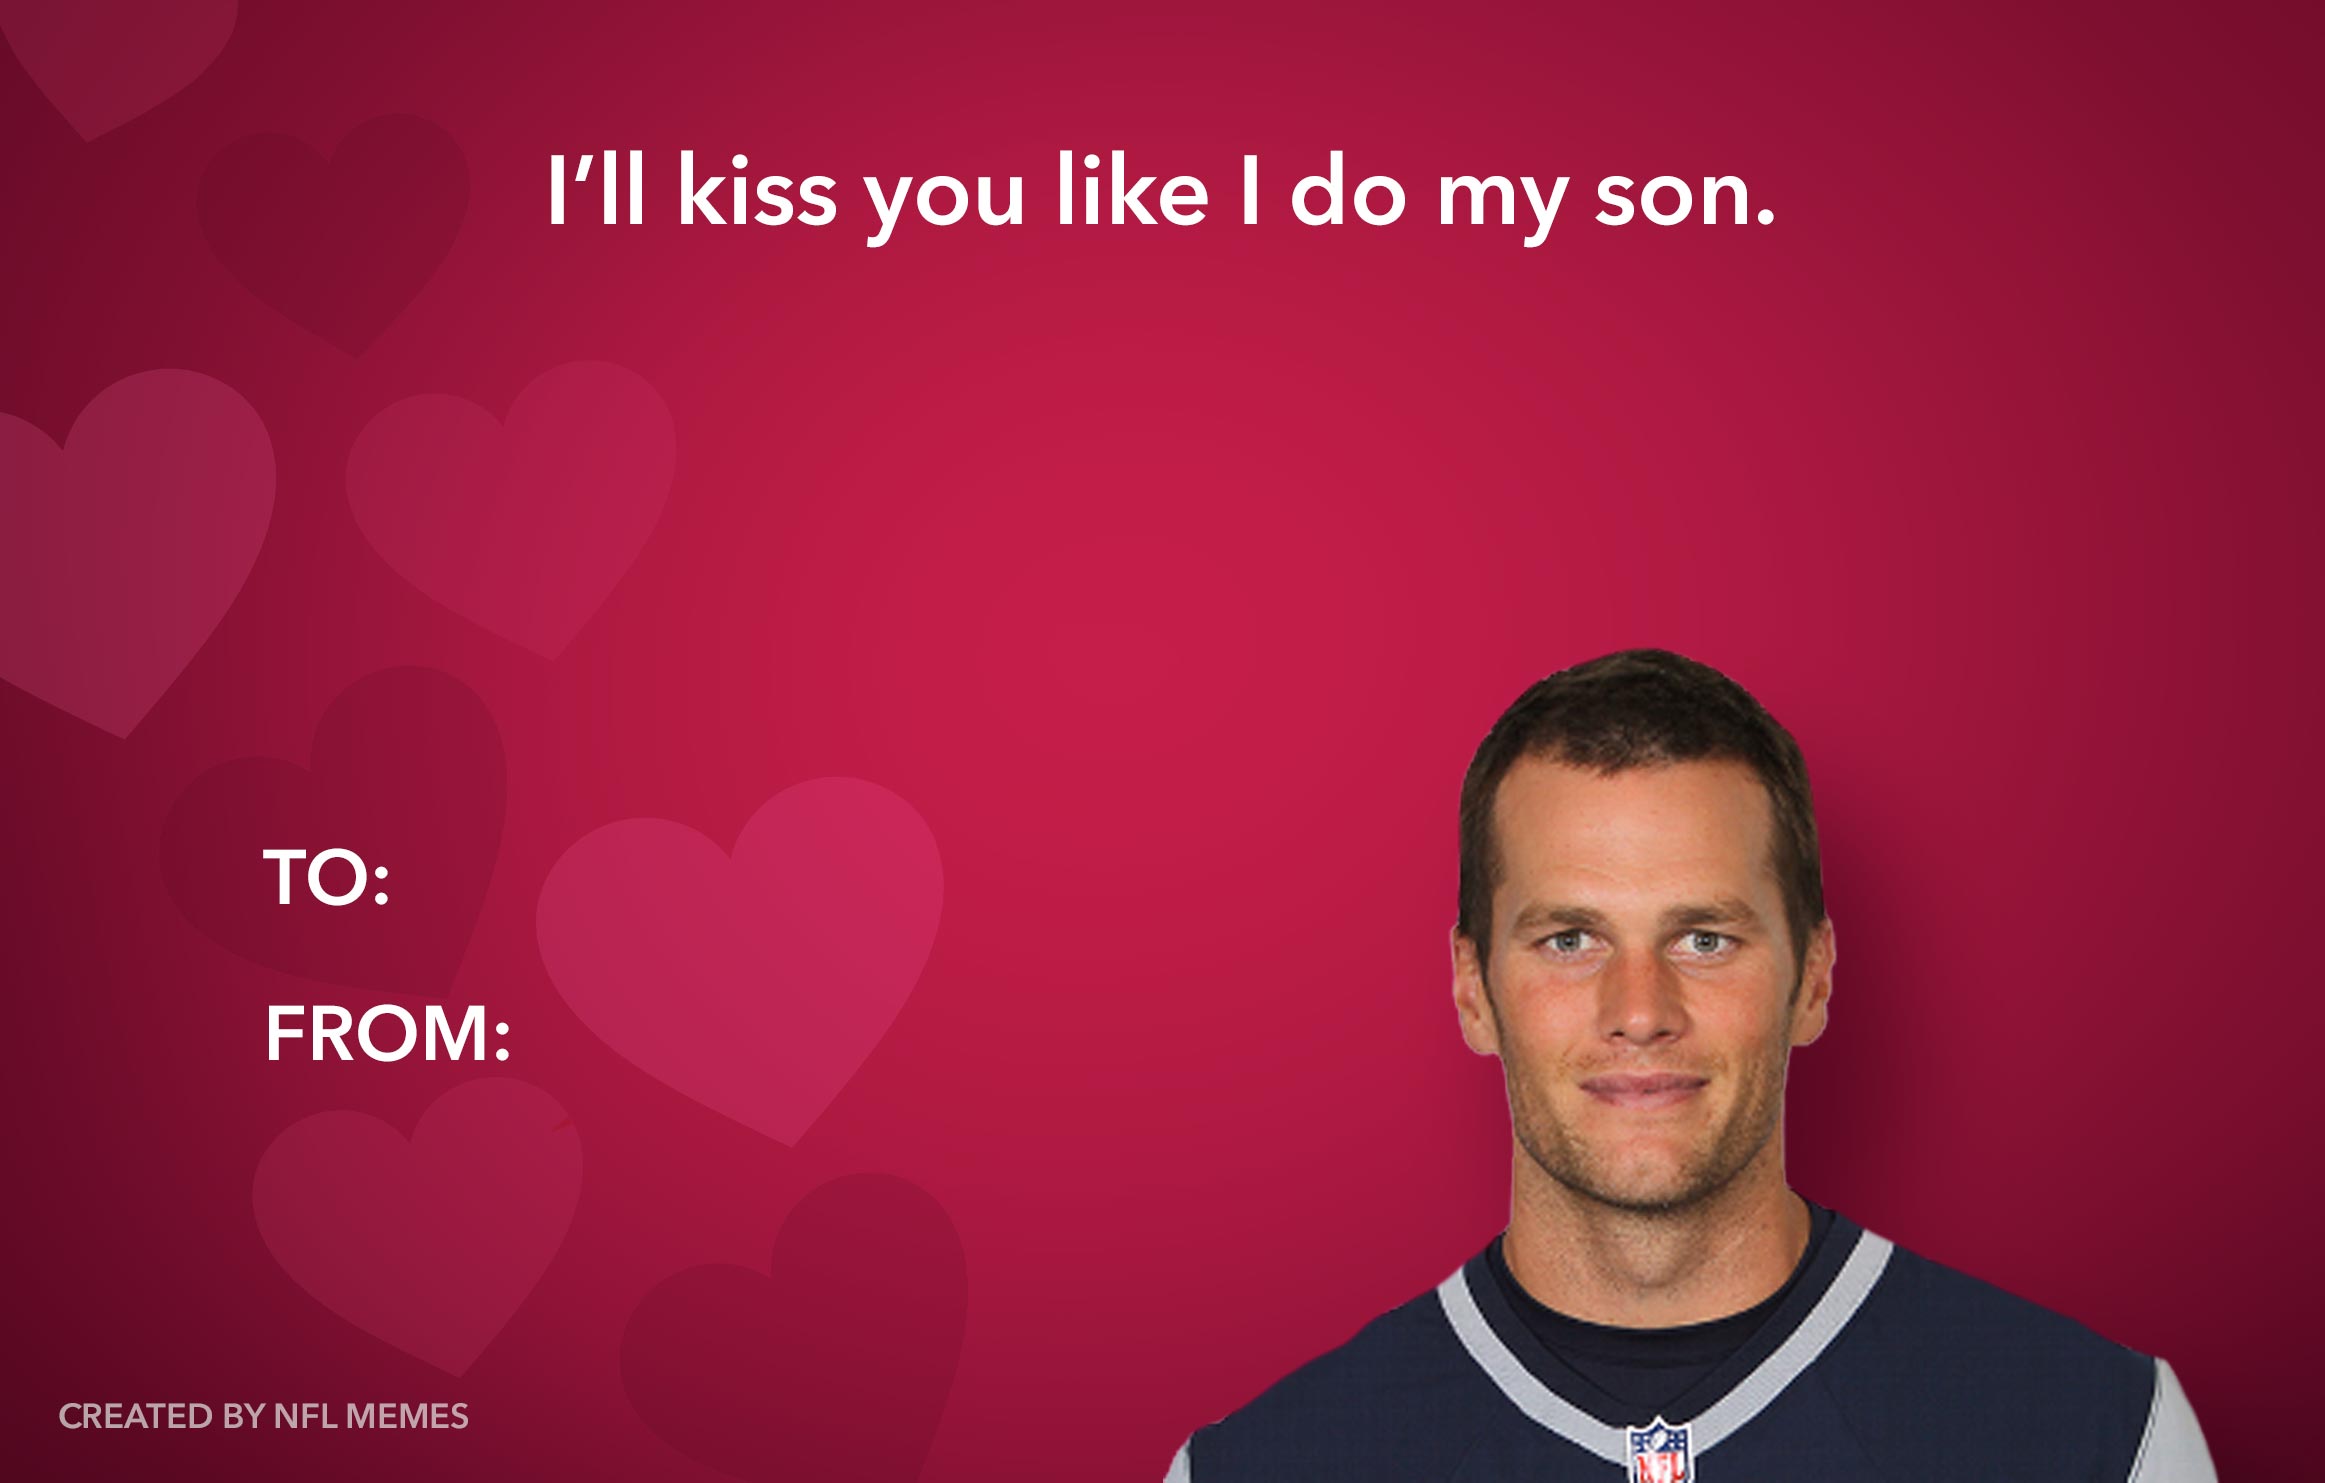 Here’s This Year’s Batch Of Hilarious NFL-Themed Valentine’s Day Cards (PICS)2325 x 1483